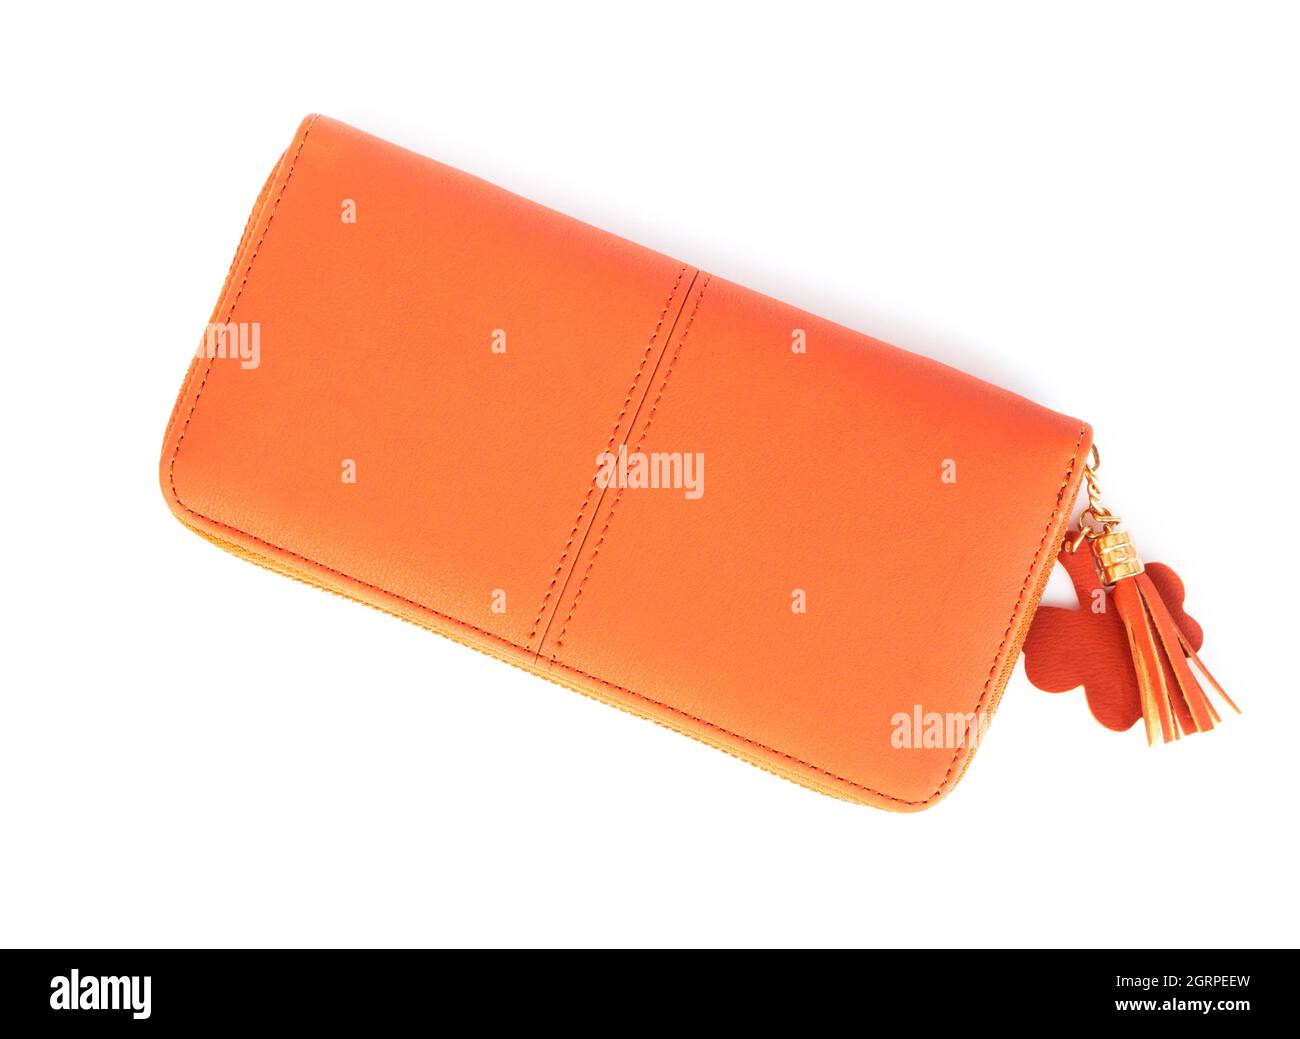 Close-up Of Clutch Bag Over White Background Stock Photo